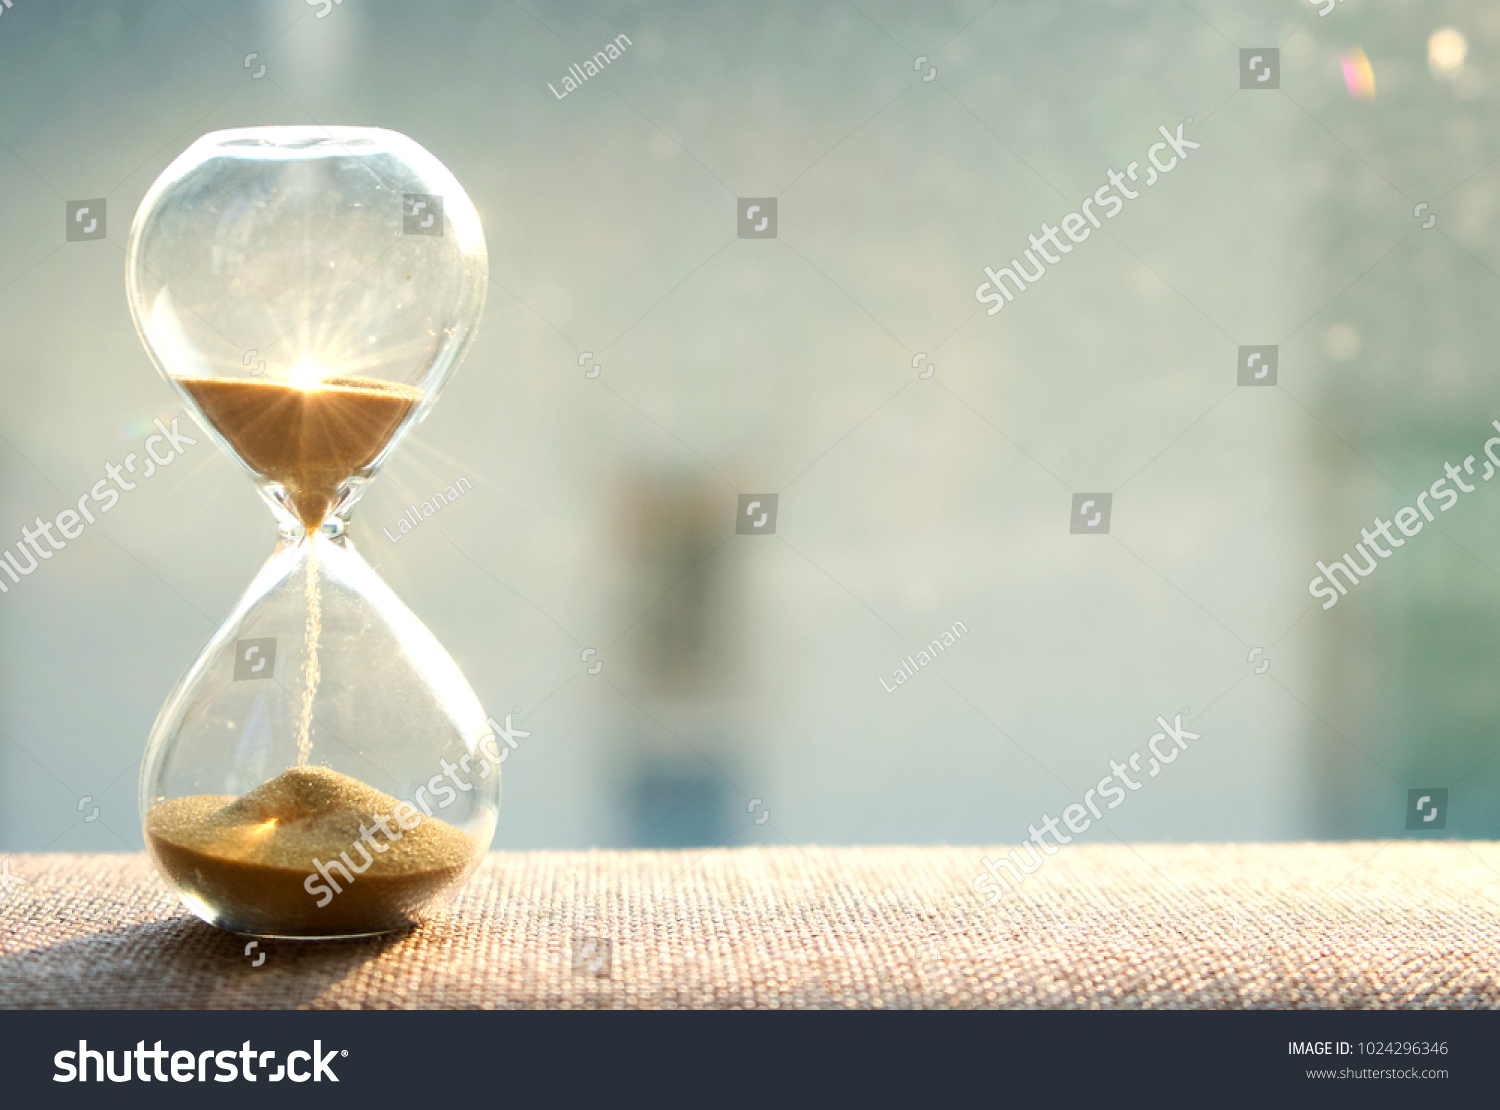 Life time passing concept. Hourglass with sun light background #1024296346